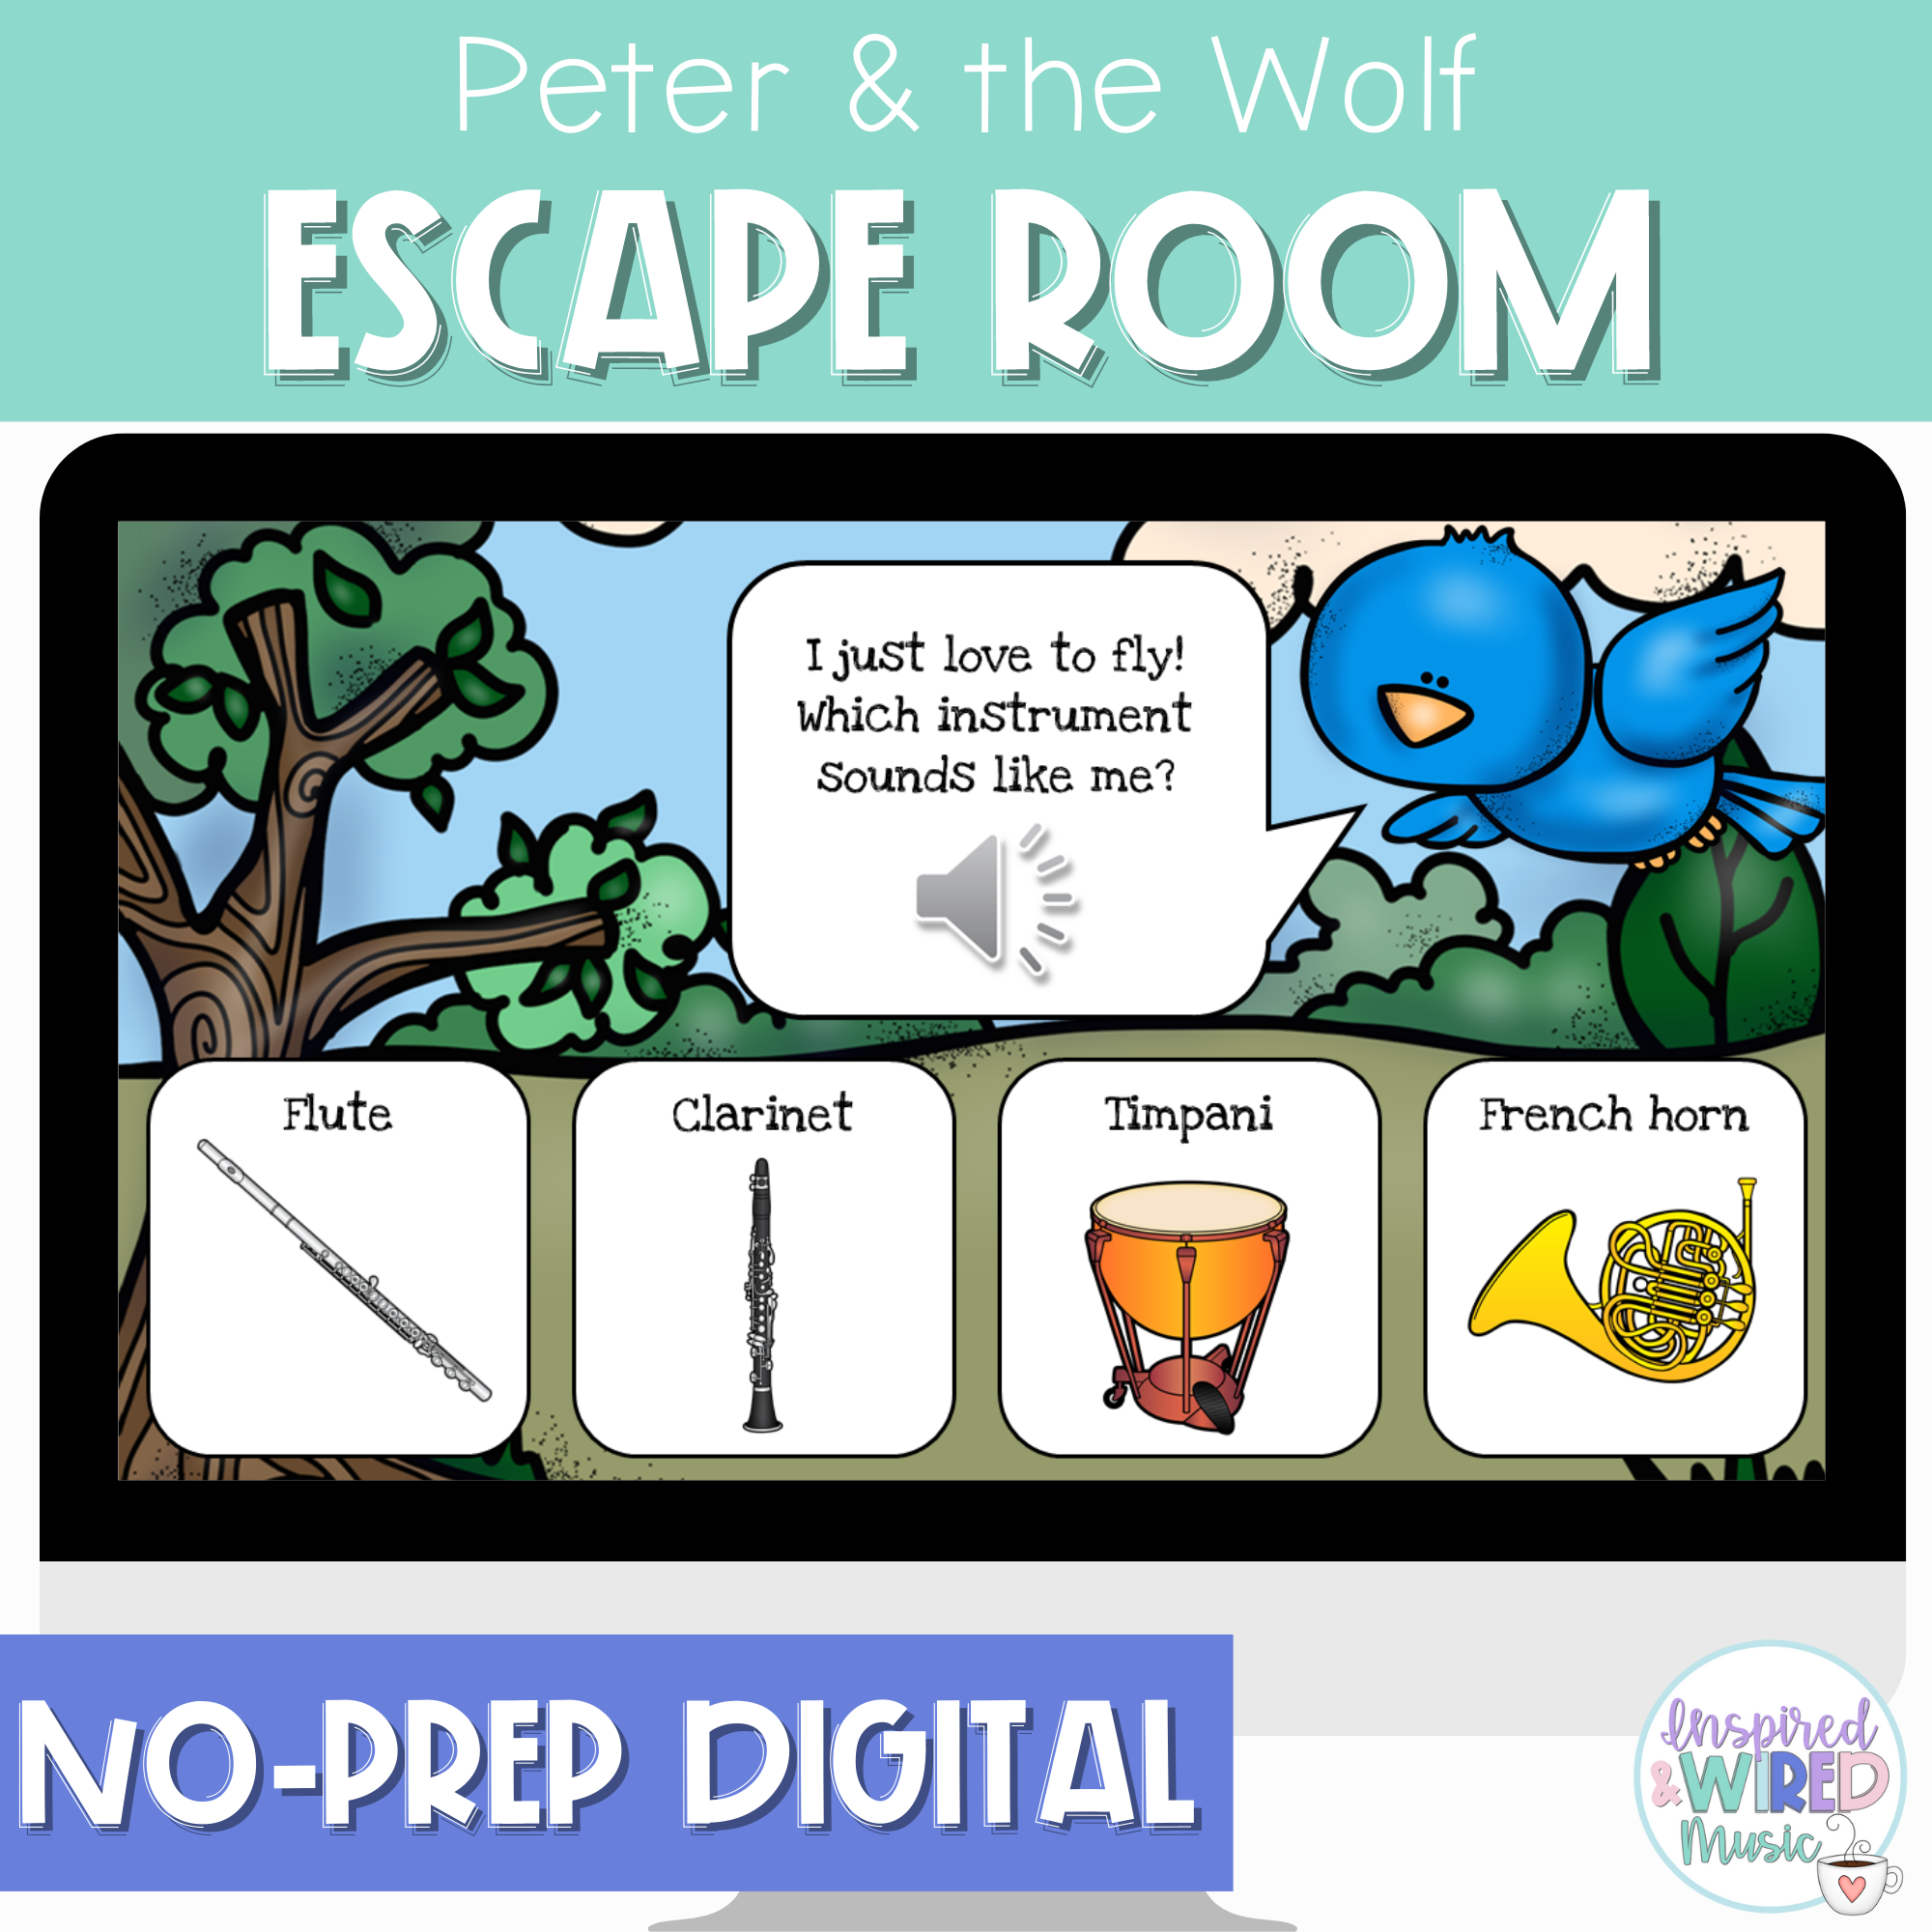 Peter and the Wolf Digital Music Escape Room